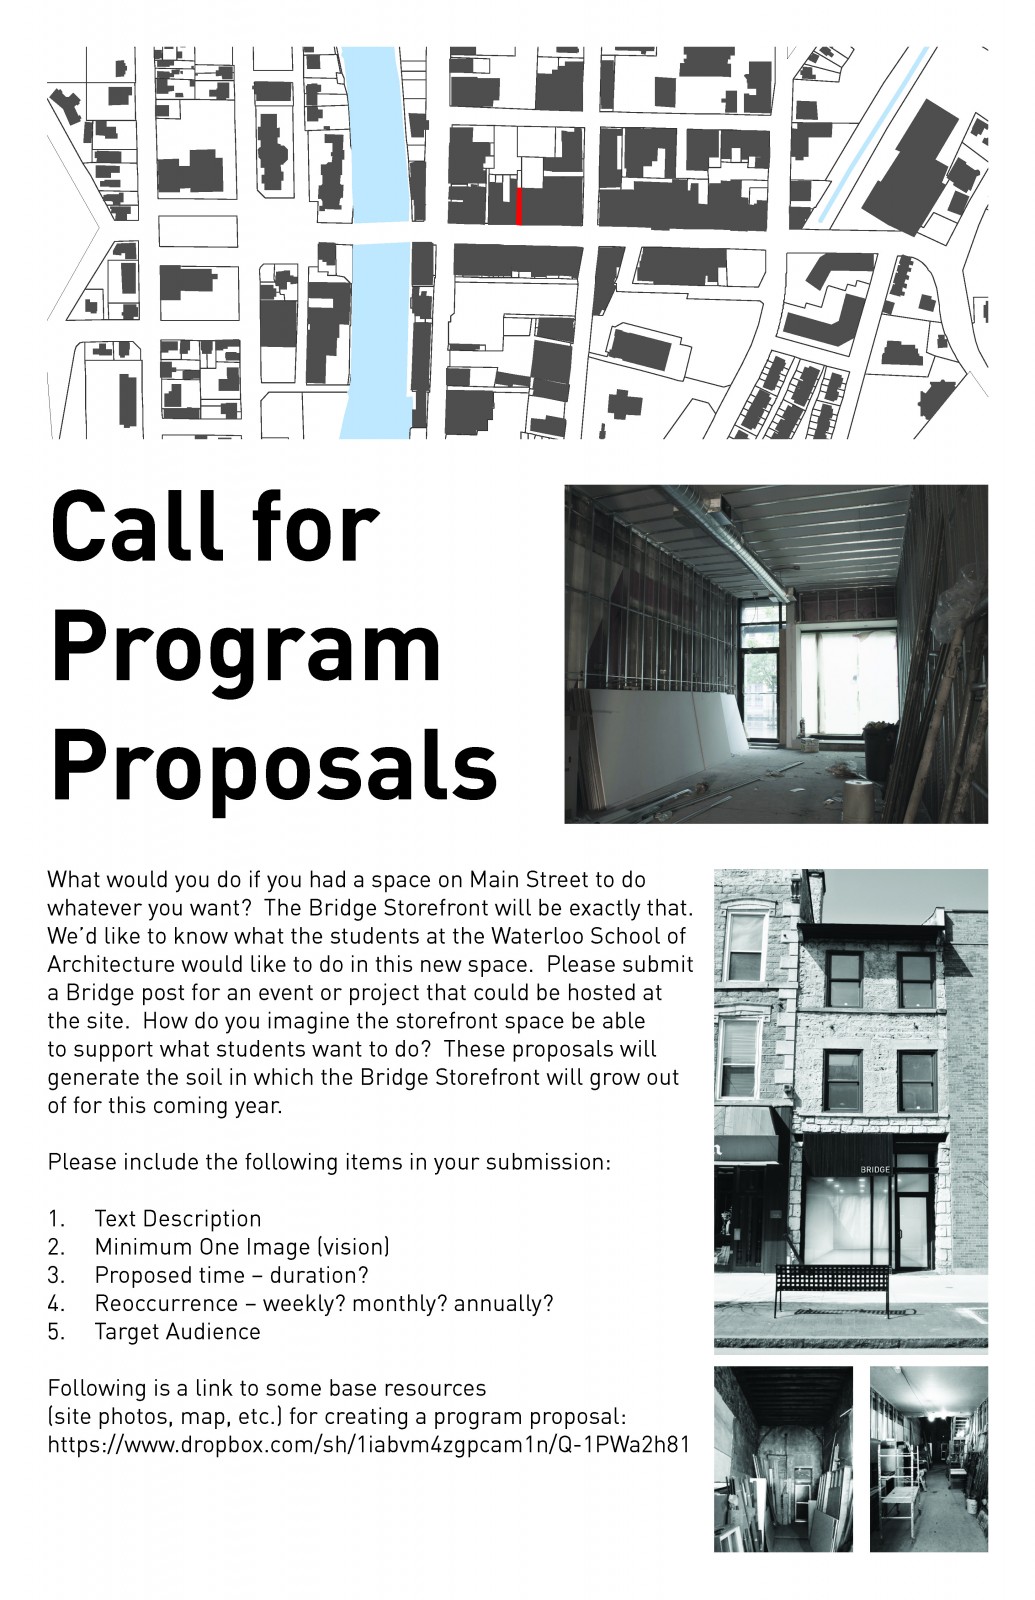 Call for Proposal final